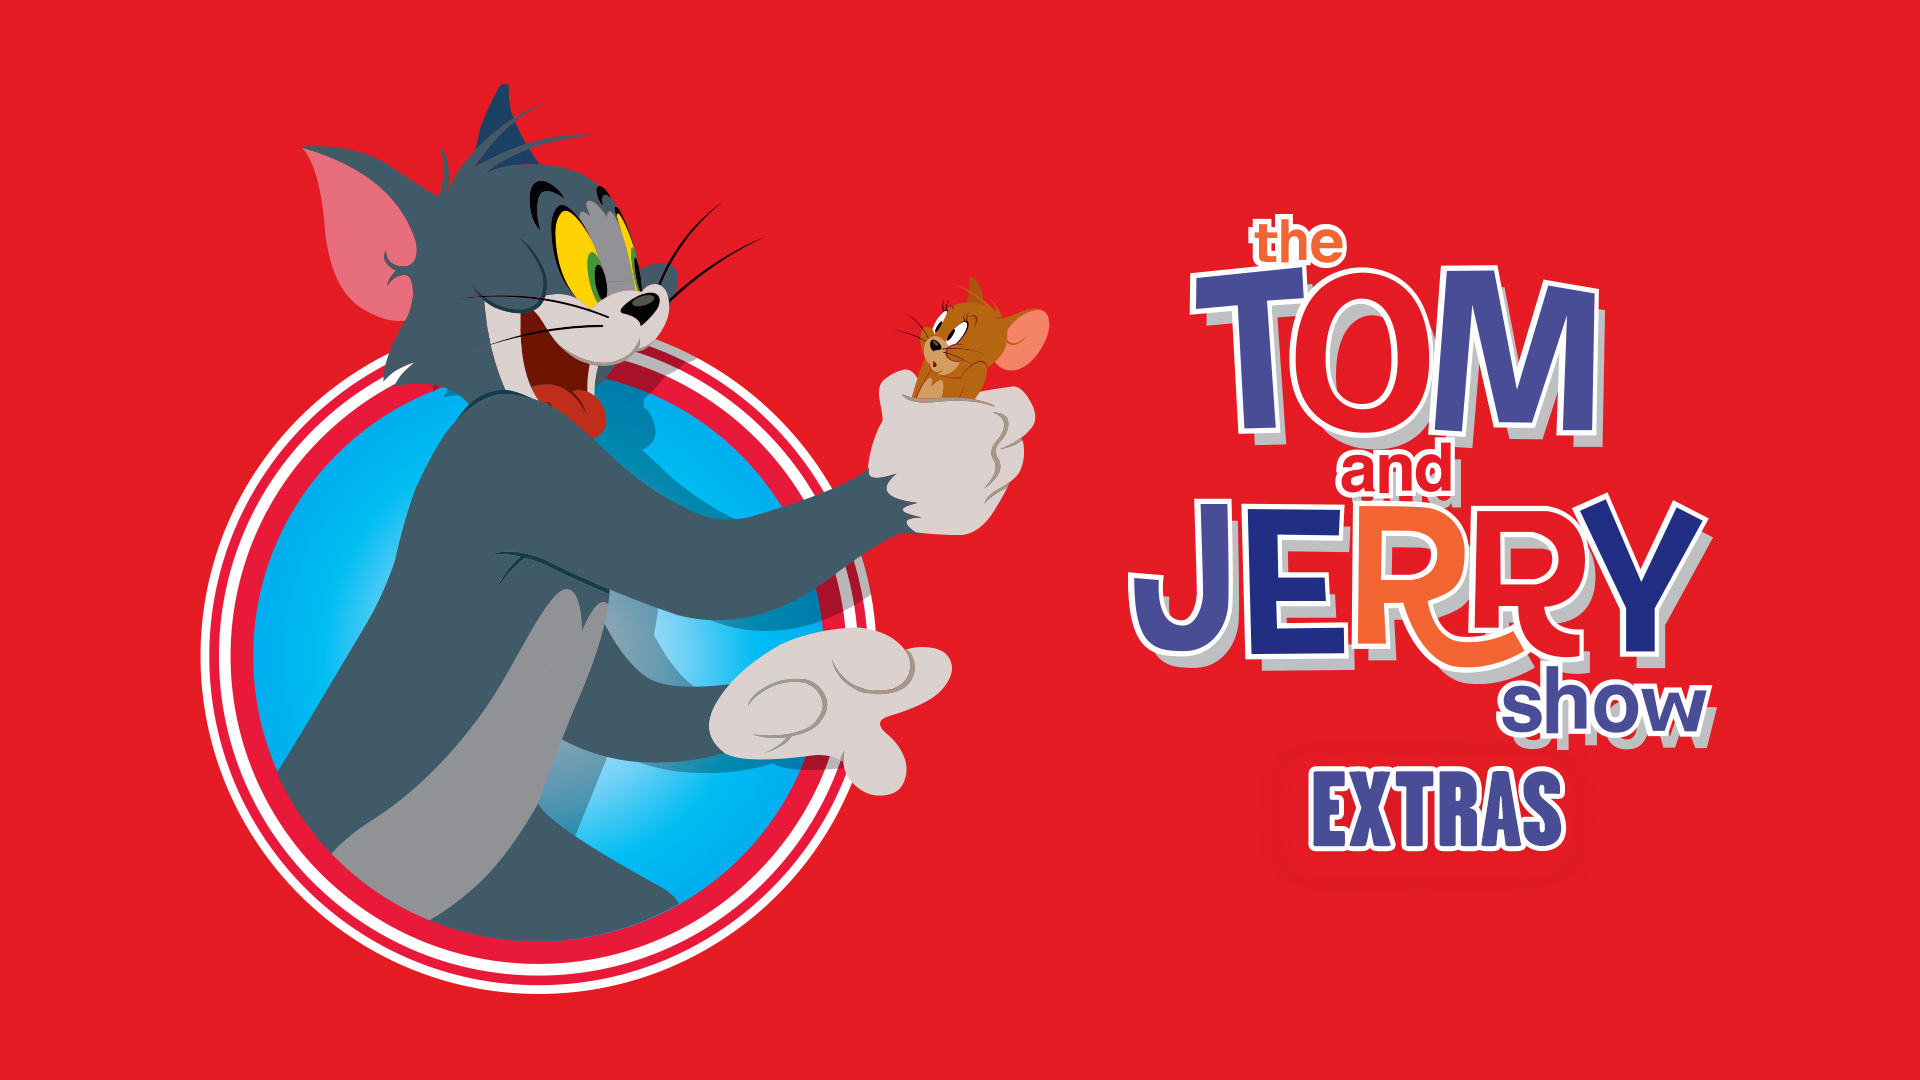 Jerry tom show and Tom And